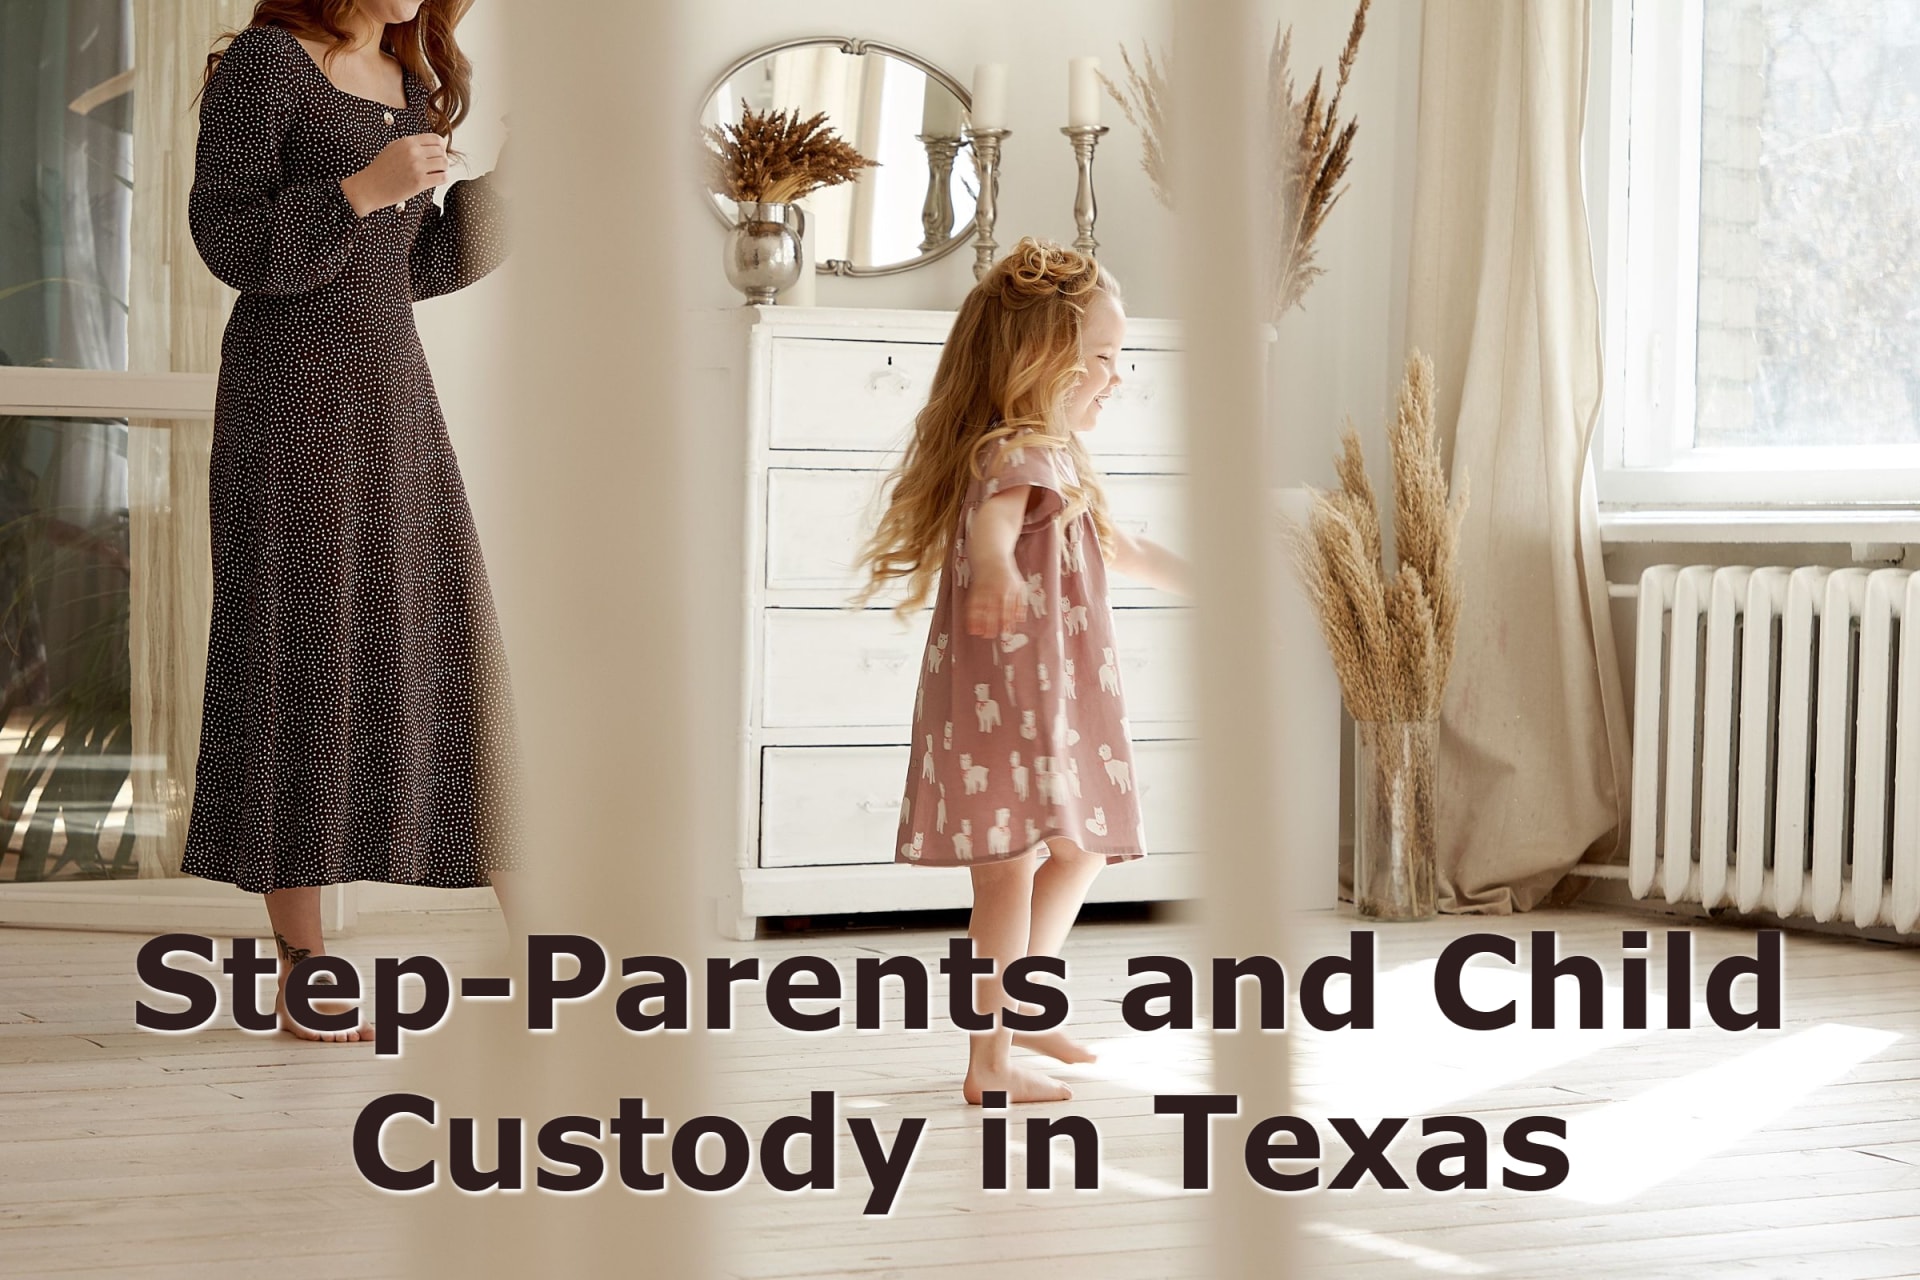 Do Stepparents Have Child Custody Rights in Texas?